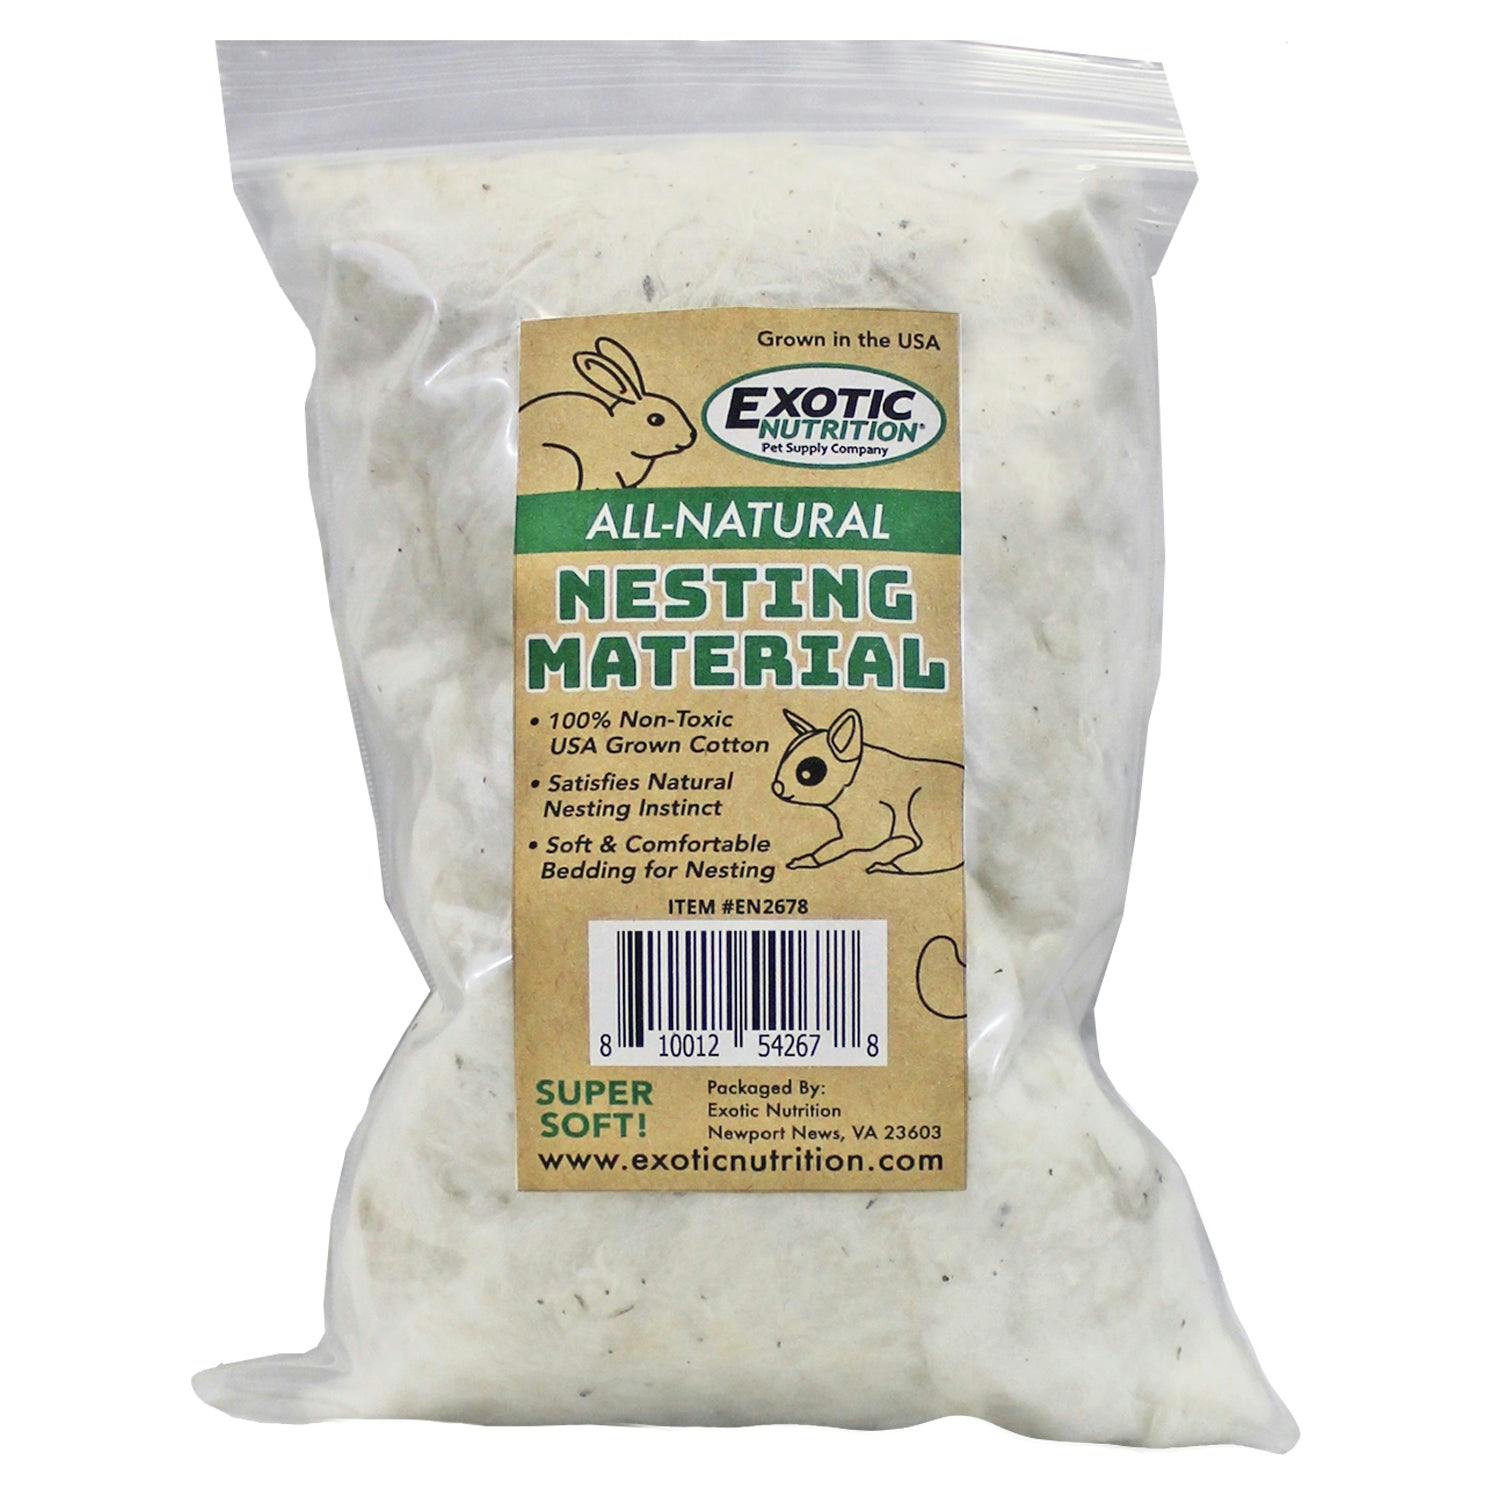 All-Natural Nesting Material